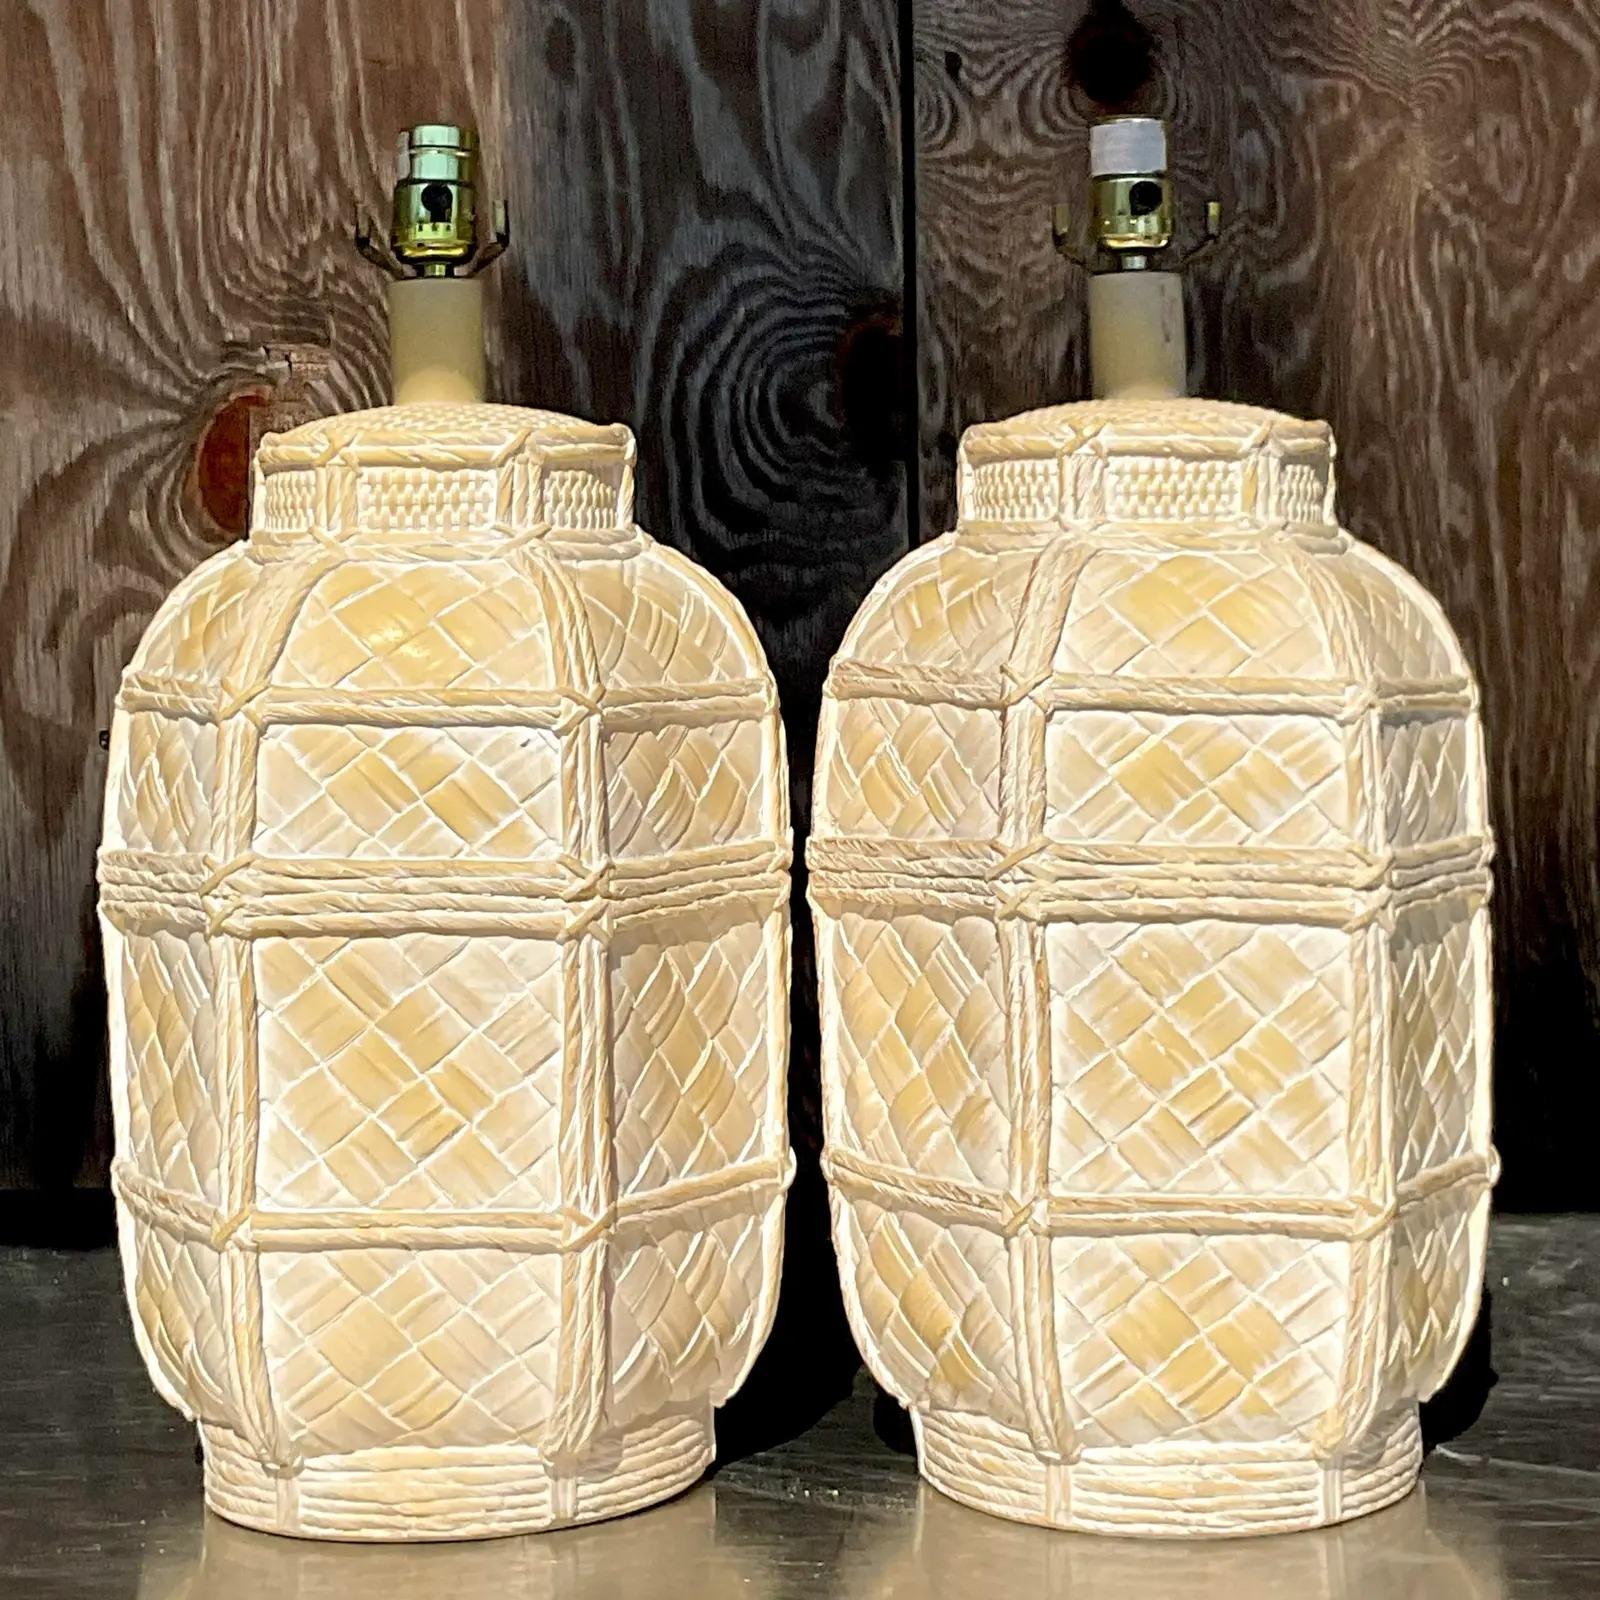 A fantastic pair of vintage Coastal table lamps. A chic matte glaze over a ceramic basket design. Acquired from a Palm Beach estate.